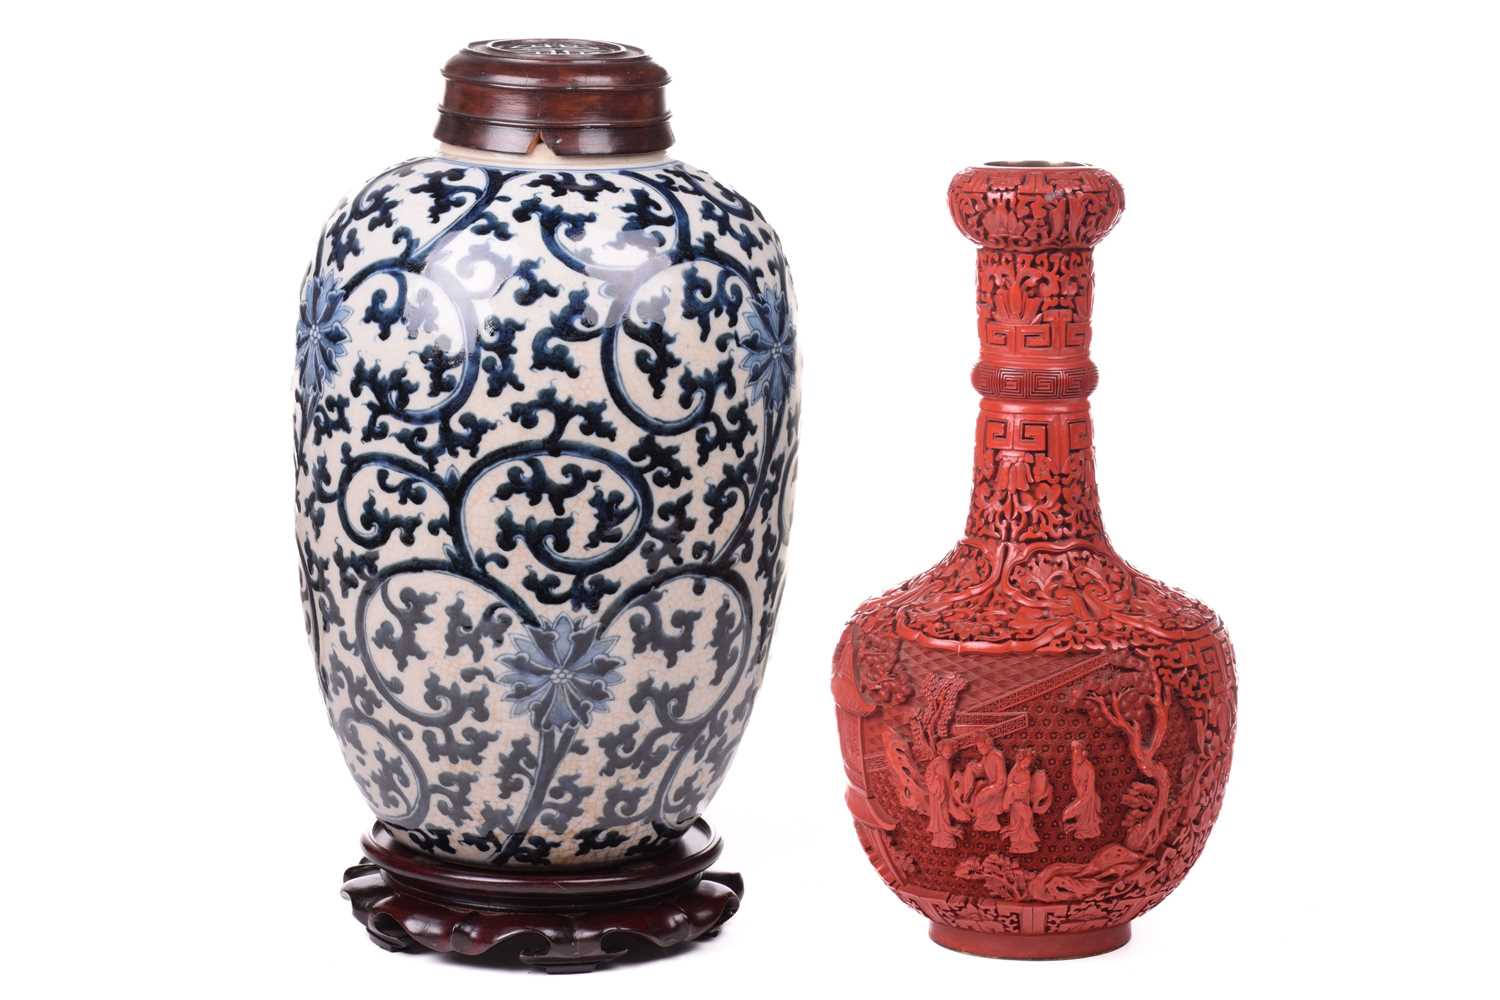 A Chinese Ming style blue and white ovoid vase, with allover foliate scroll and floral design, later